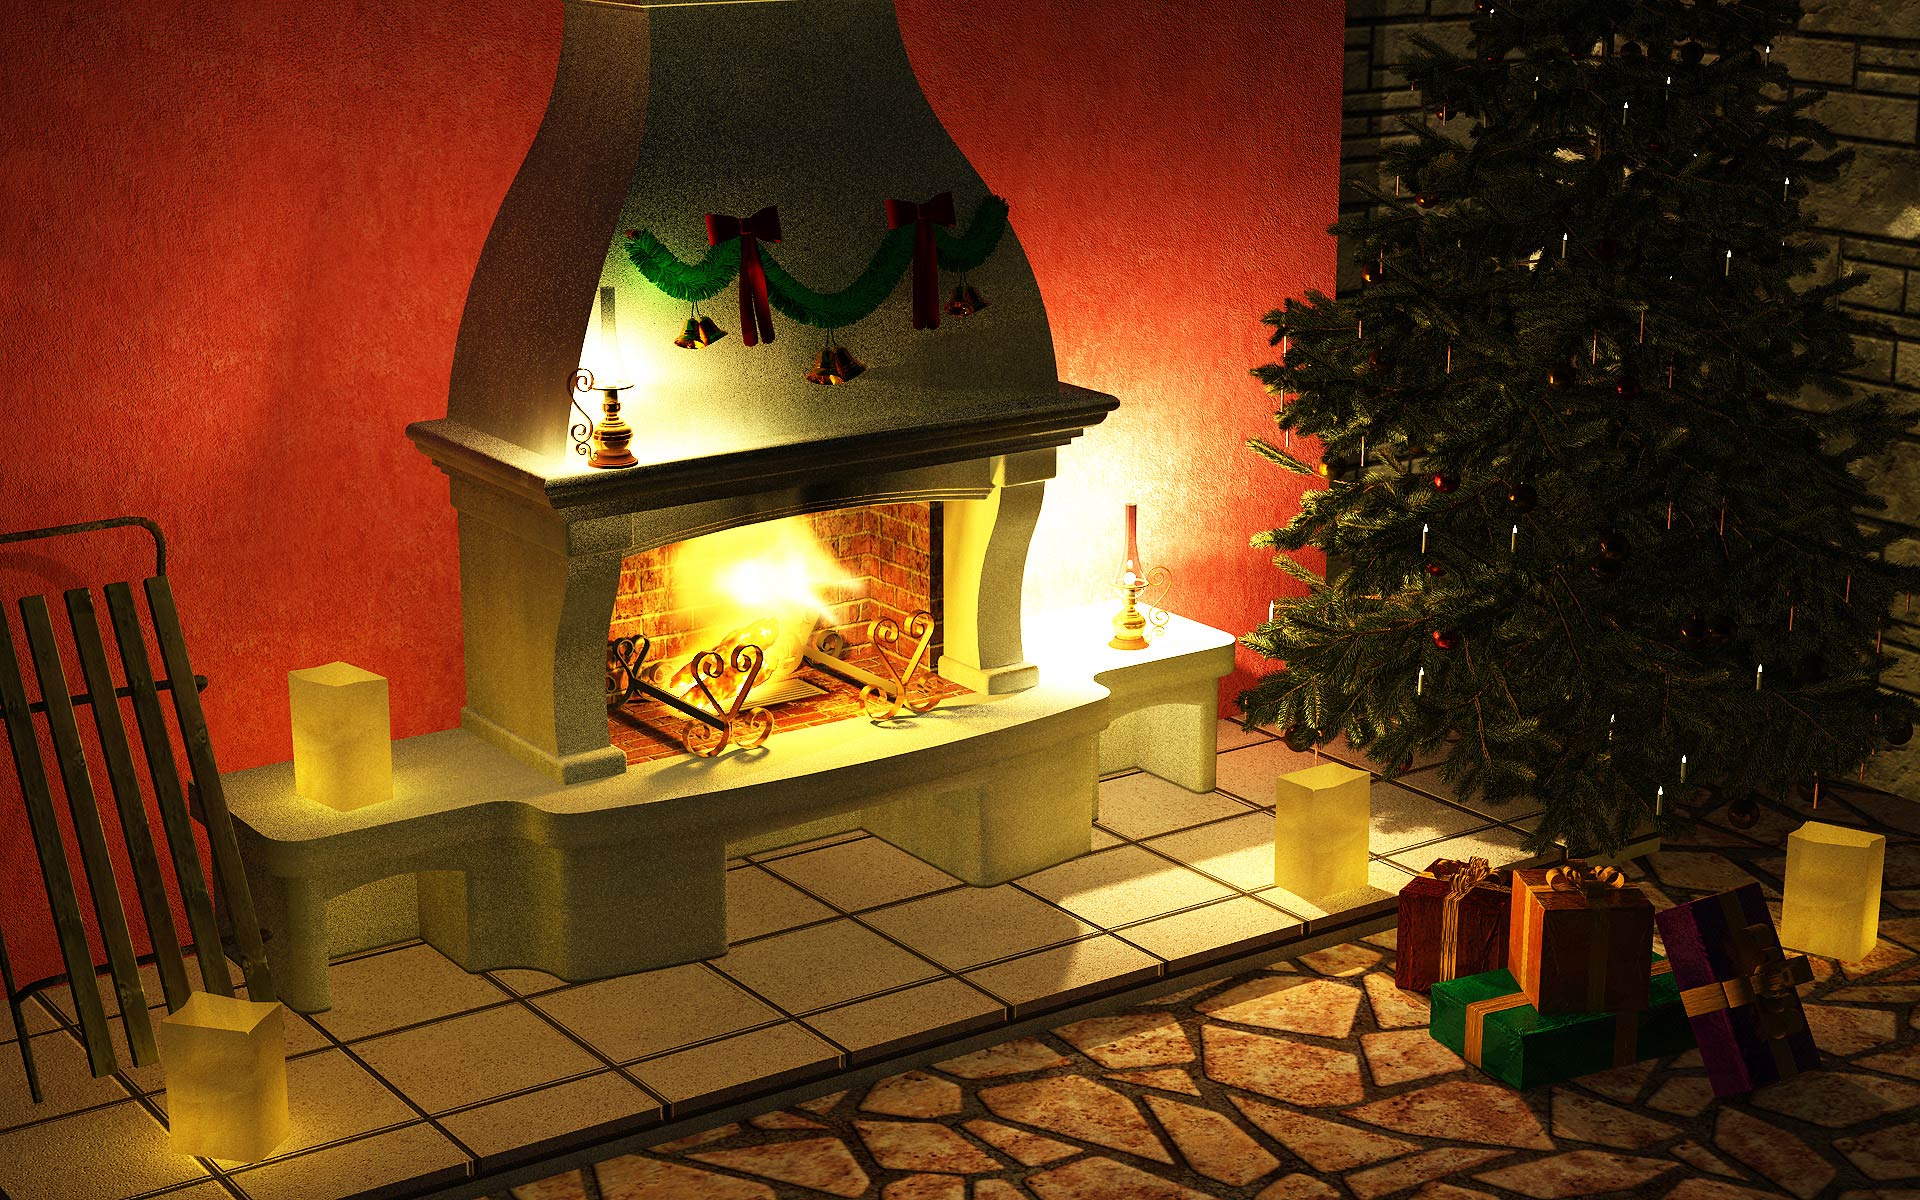 christmas, Fireplace, Fire, Holiday, Festive, Decorations, Rw Wallpaper